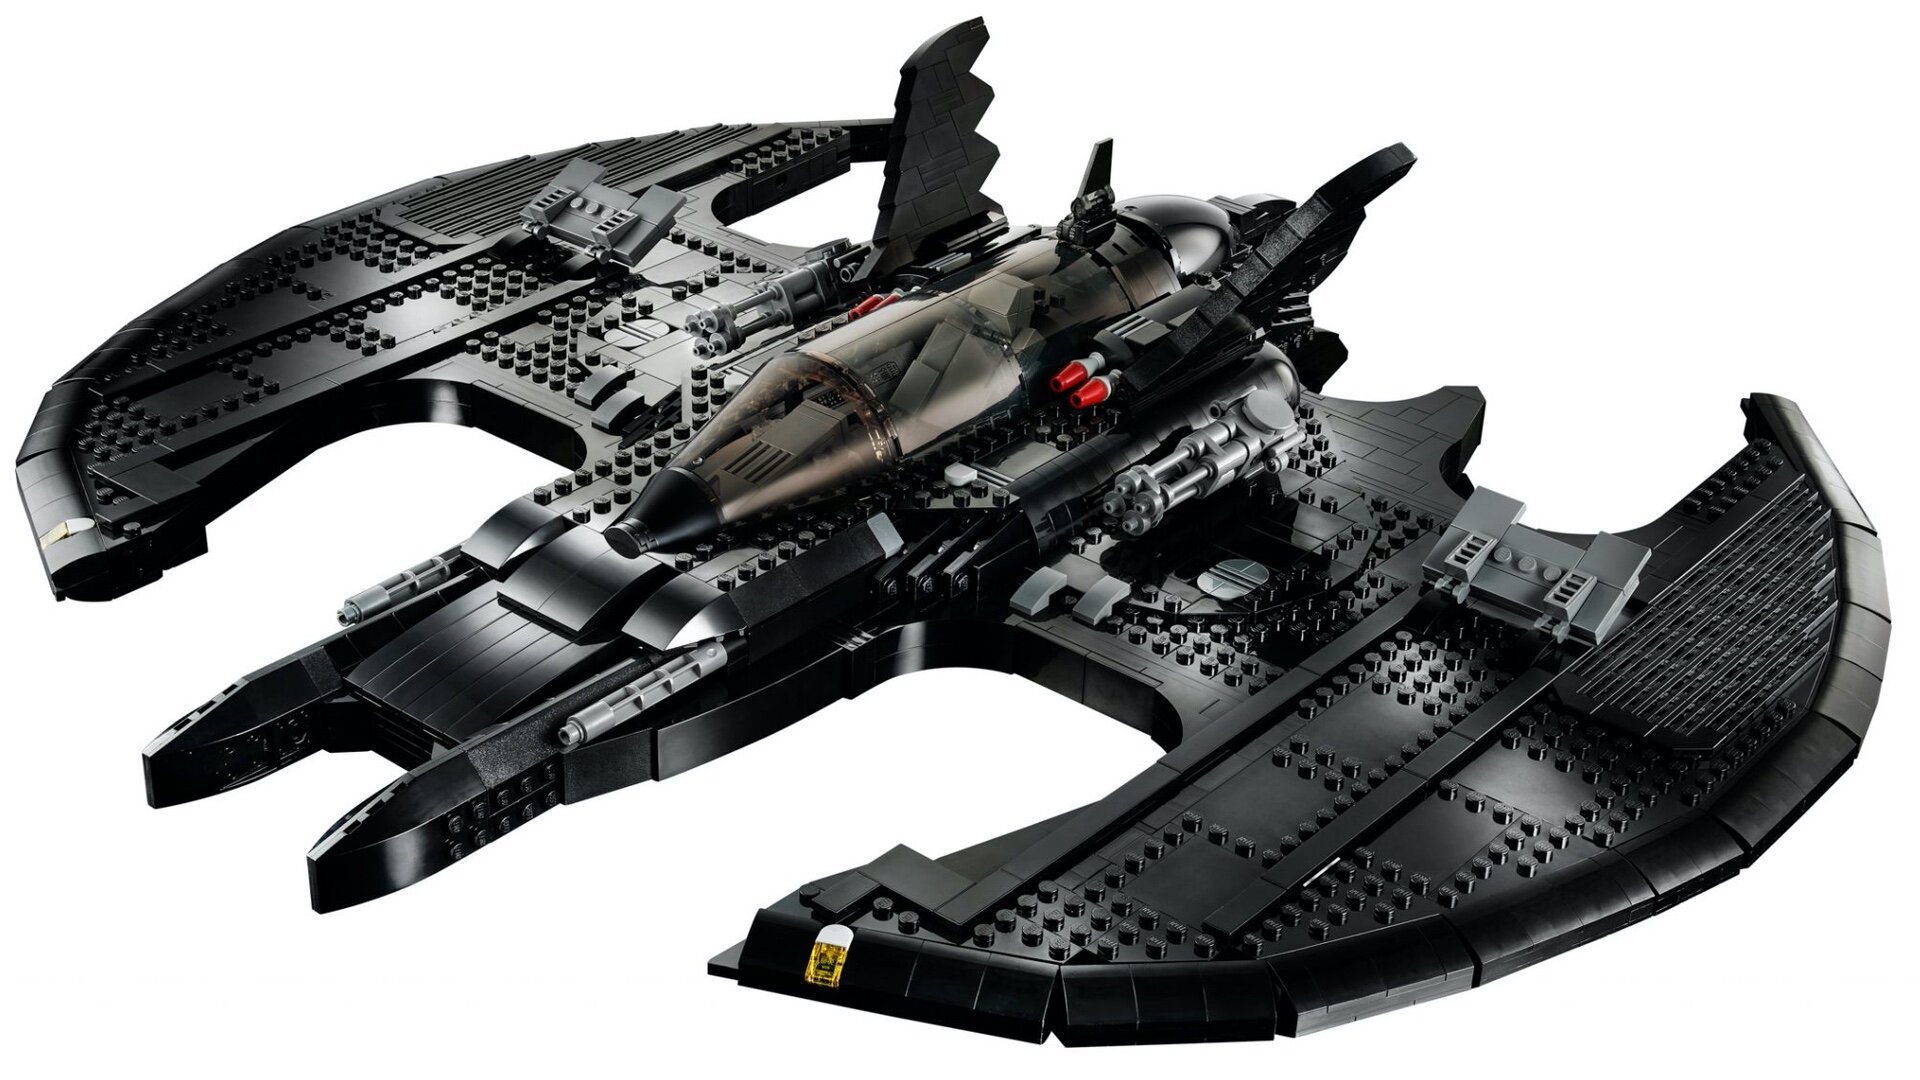 Batman 1989 Batwing Set Coming in October from Lego – The Hollywood Reporter